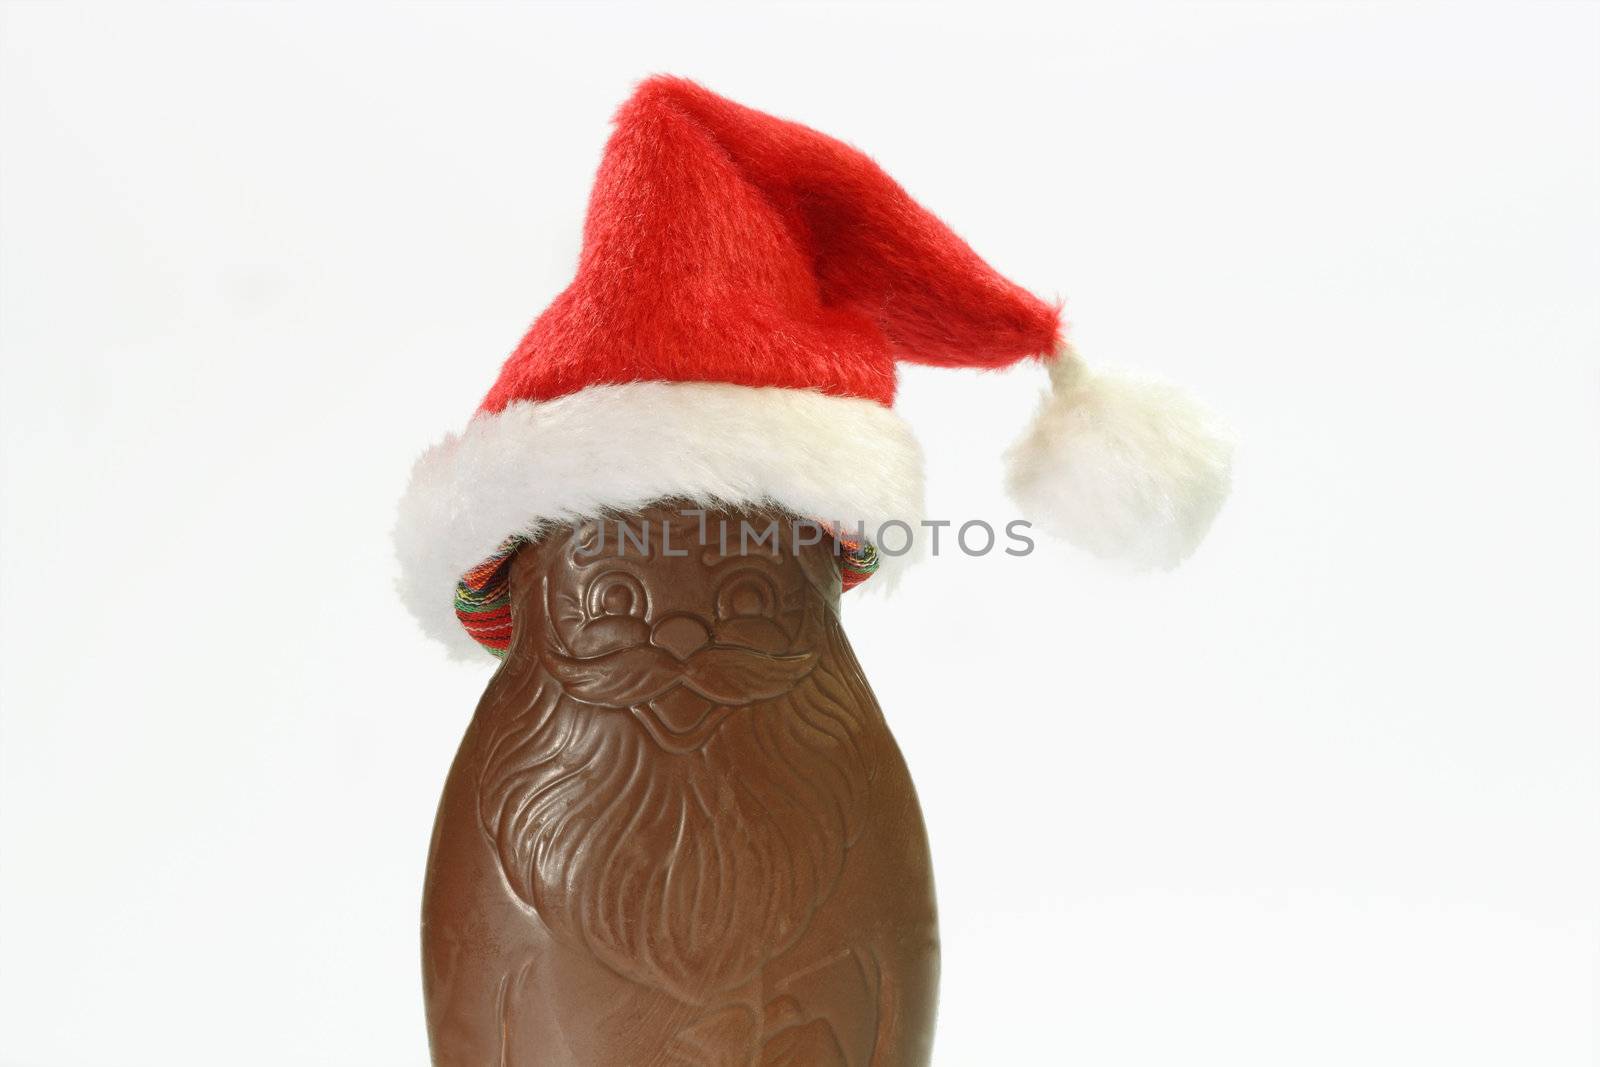 Santa claus with hat made of chocolate. 
